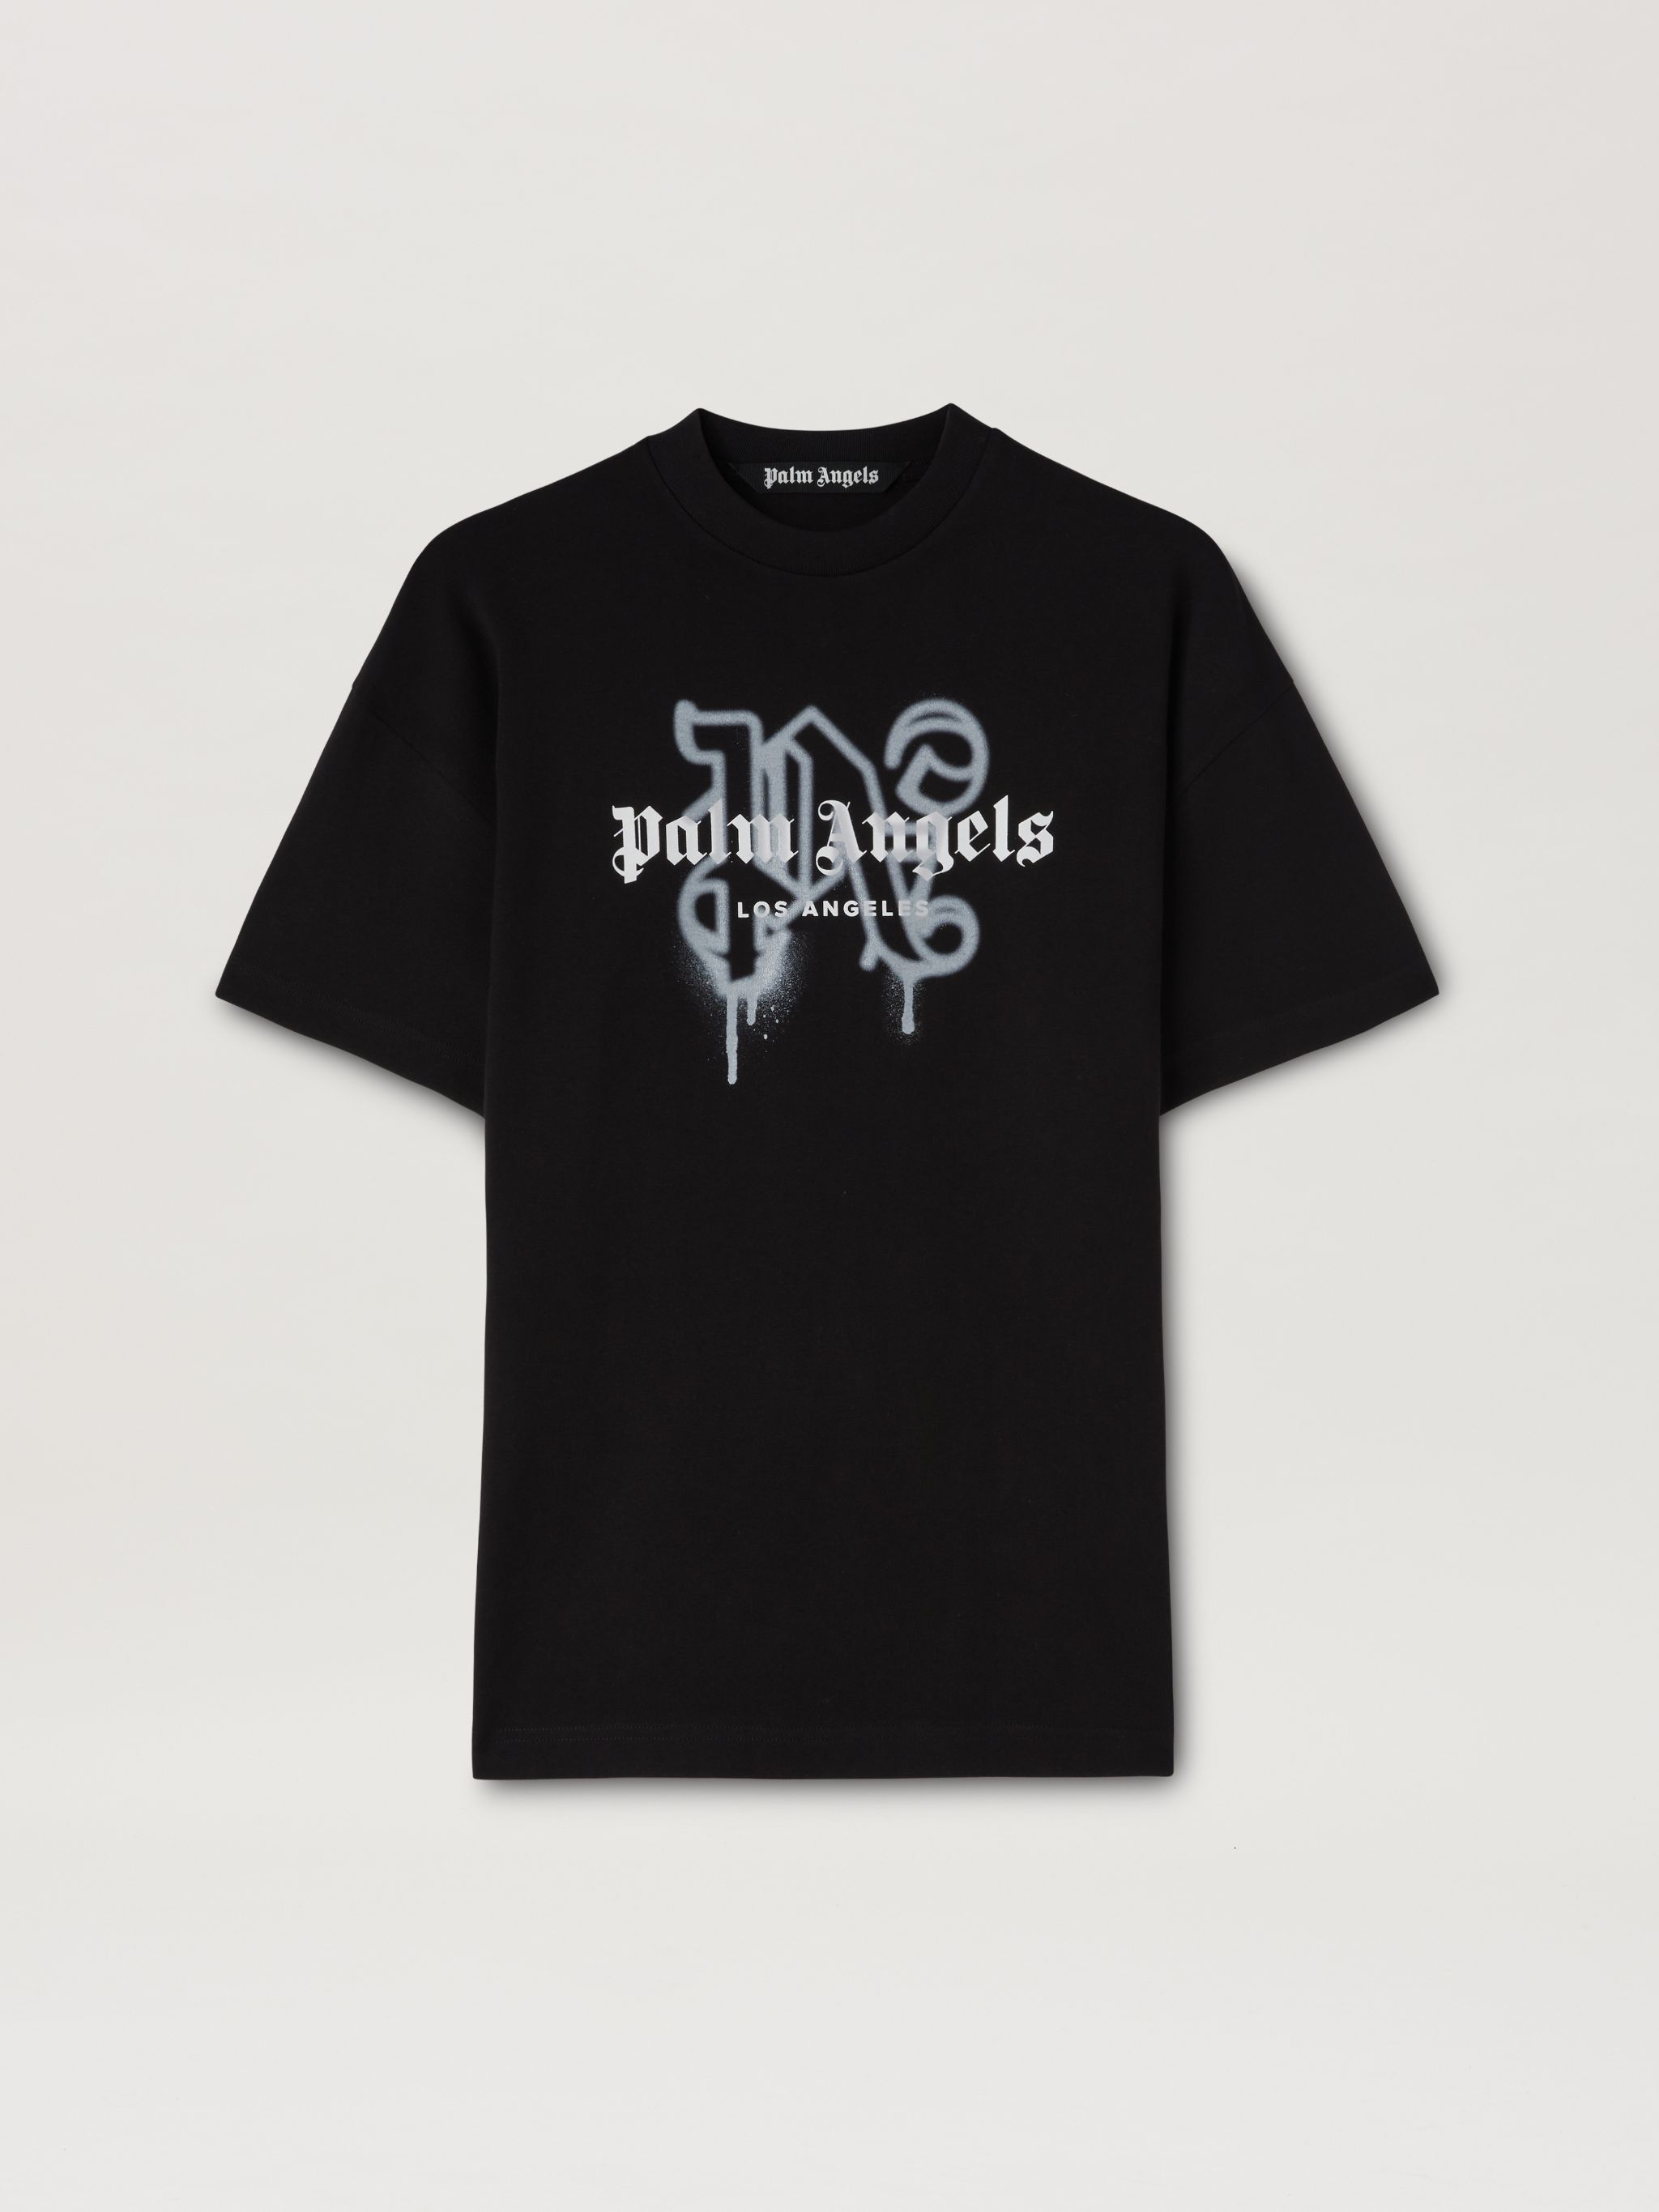 MONOGRAMM SPRAY CITY T-SHIRT LOS ANGELS - Palm Angels® Official